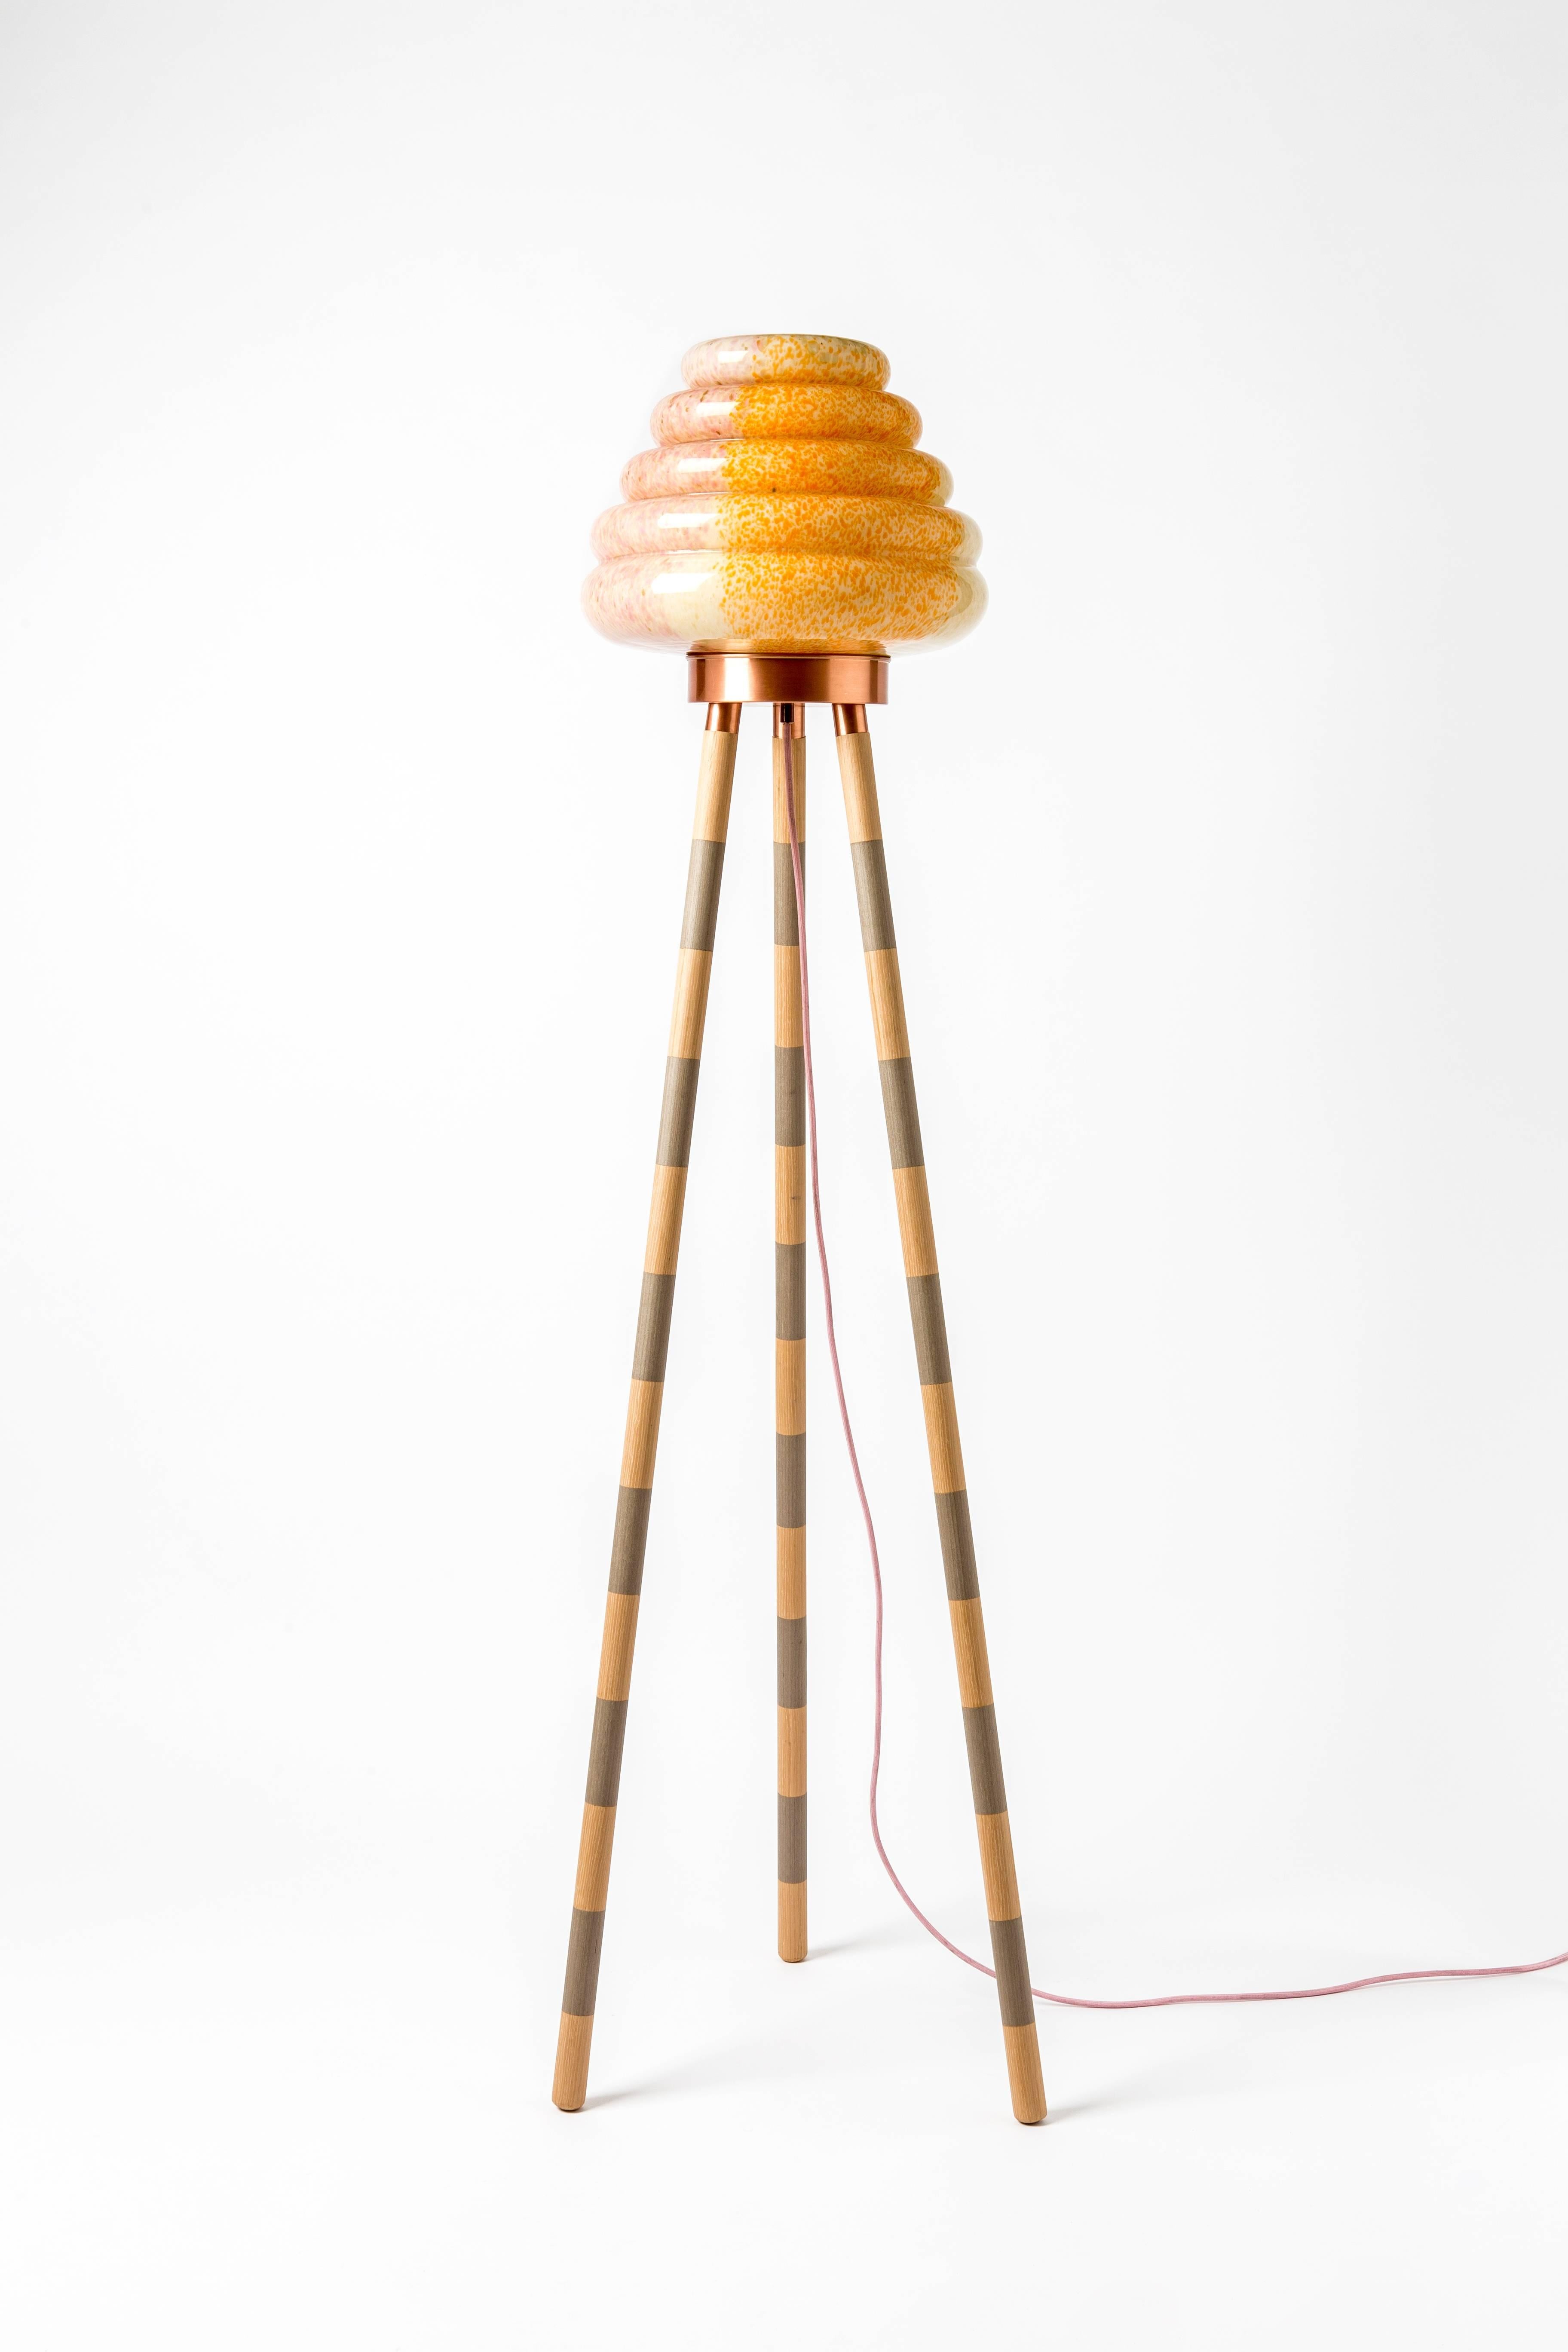 Other Colmena Beehive Floor Lamp Hand Blown Colored Glass Lampshade, Polished Copper For Sale